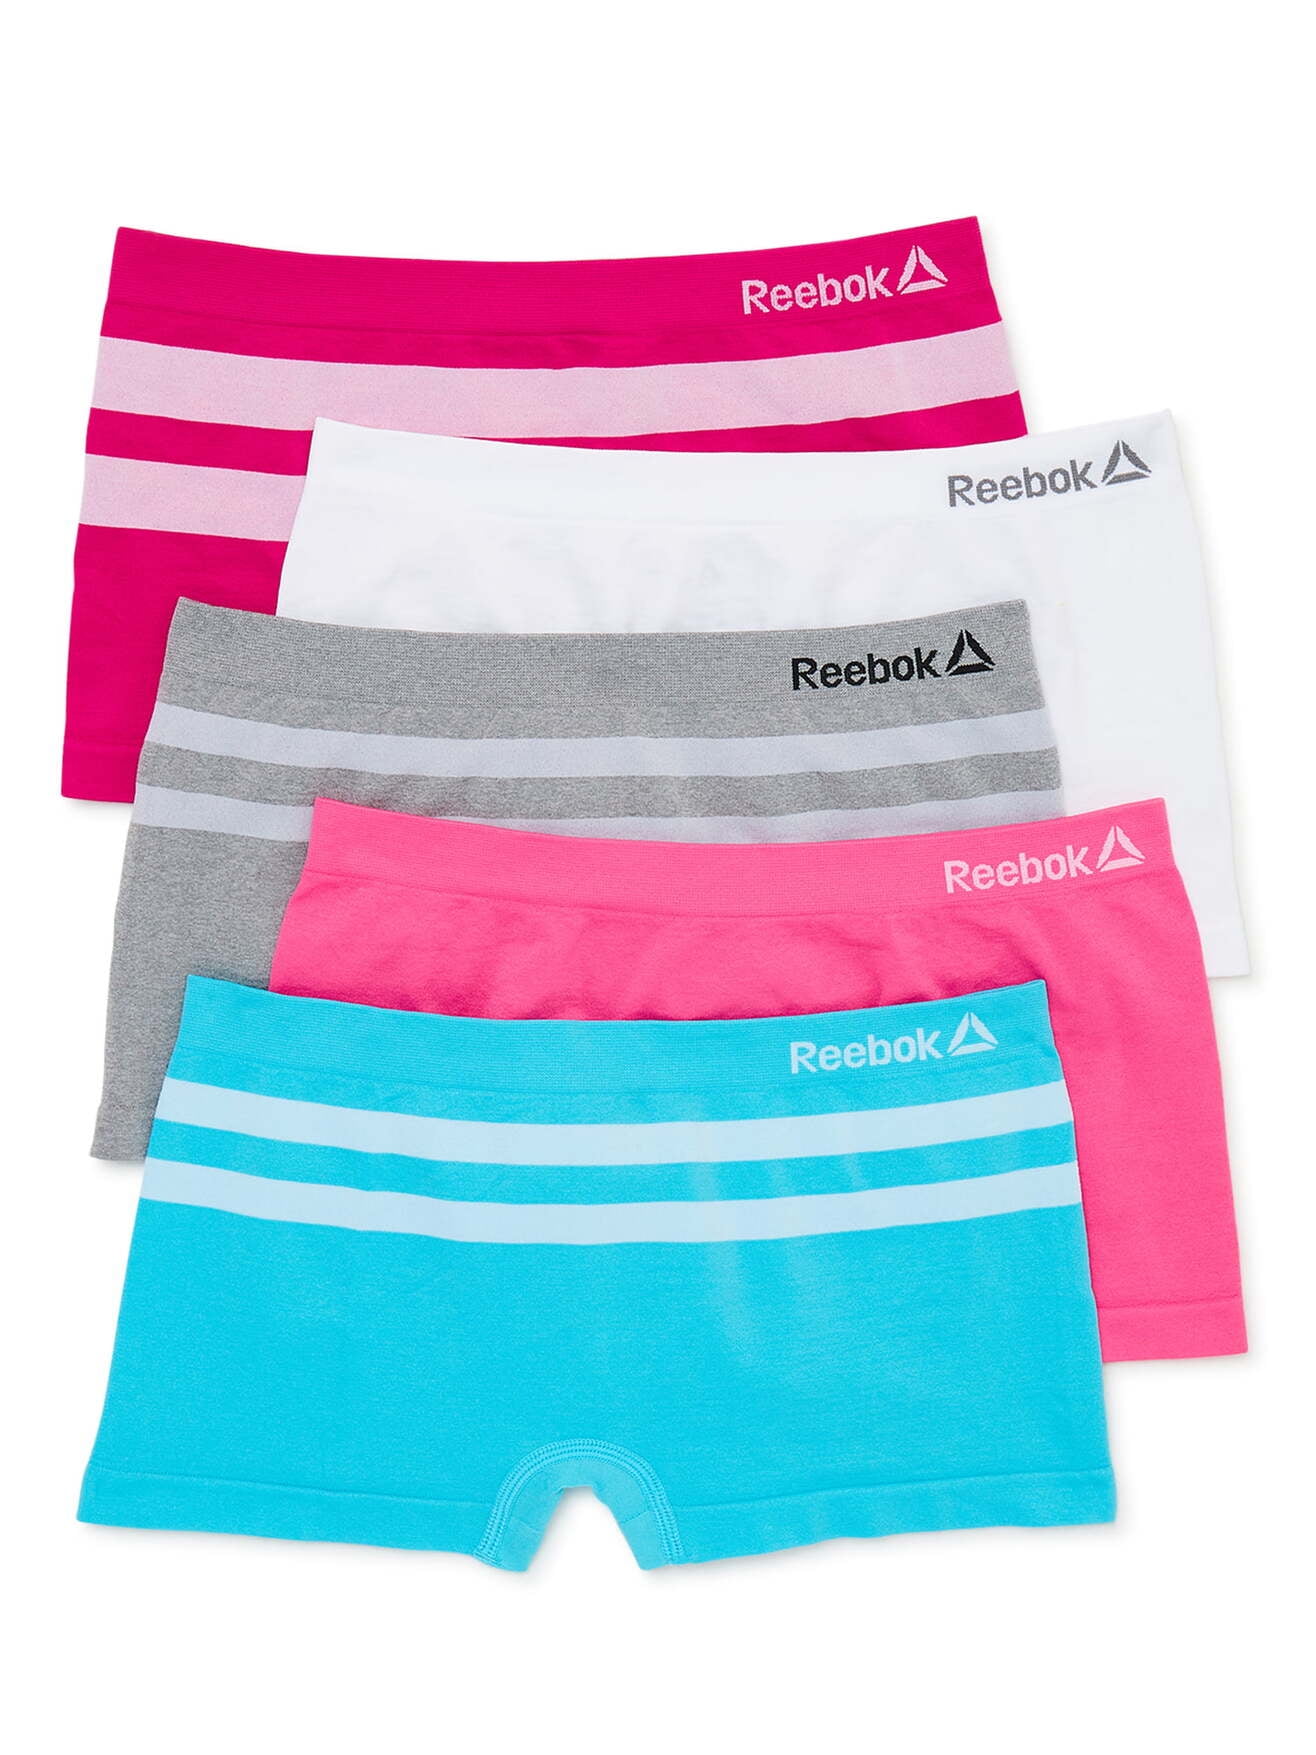 5 Pack Ladies Reebok Elasticated Logo Waistband Briefs Sizes from 8 to 14